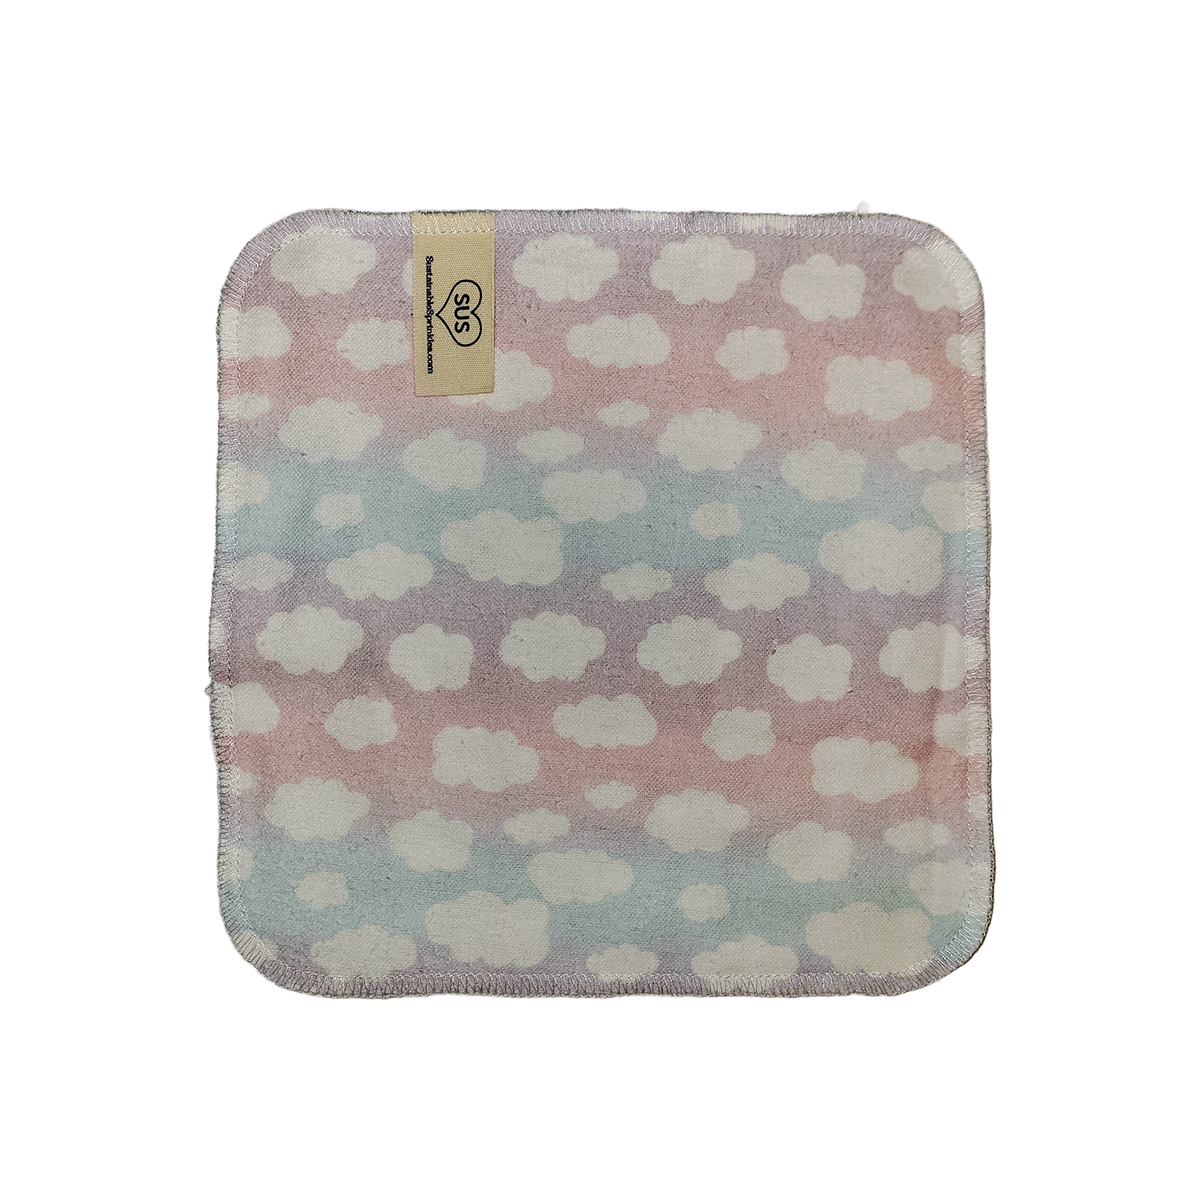 Flannel Reusable Wipes - Cotton Candy Clouds